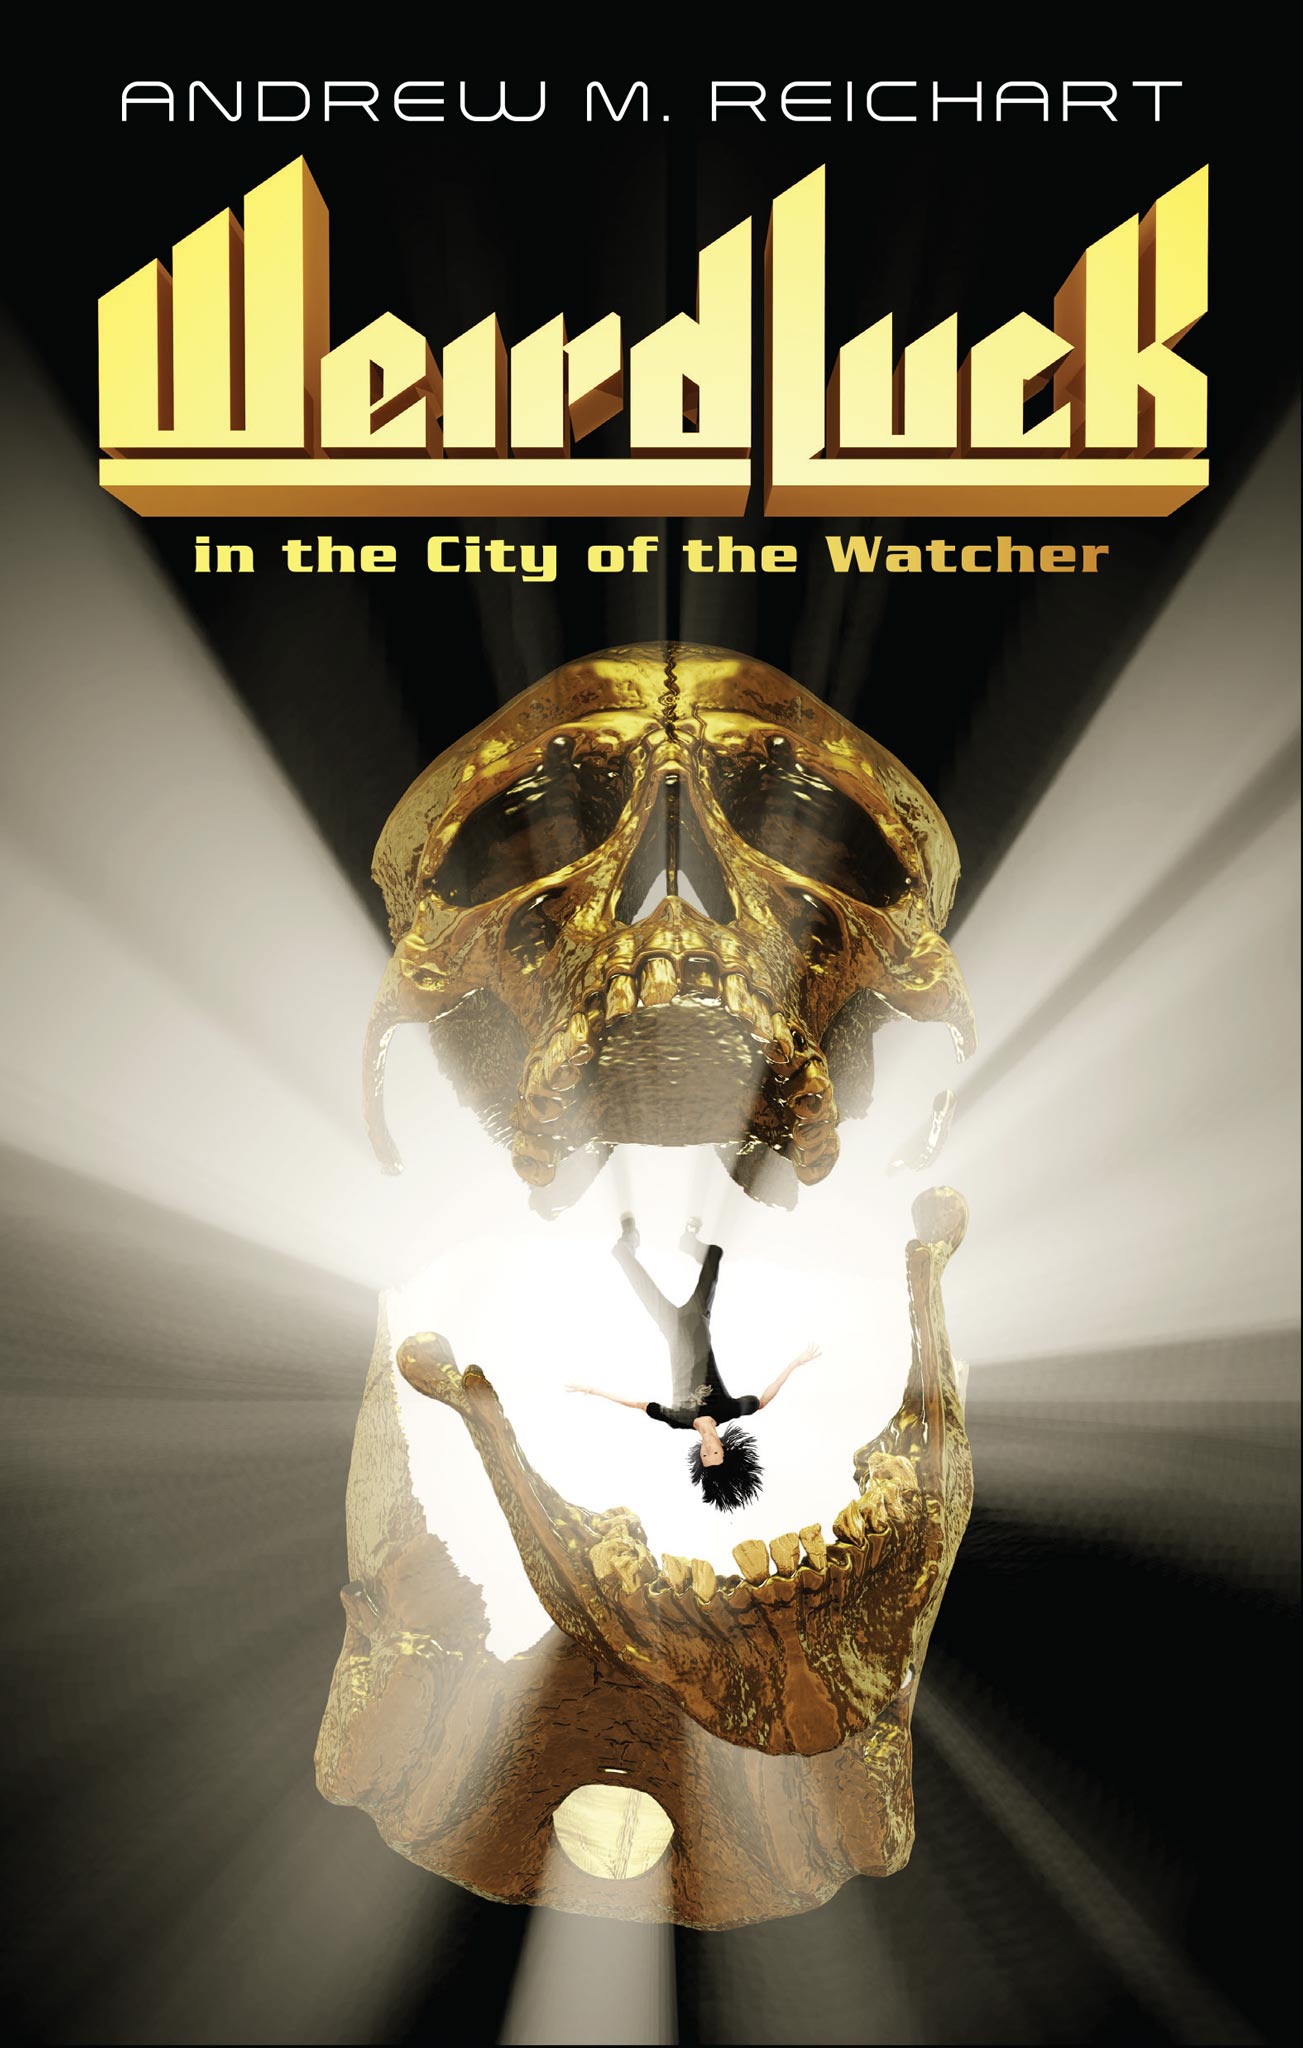 Weird Luck in the City of the Watcher Book Cover